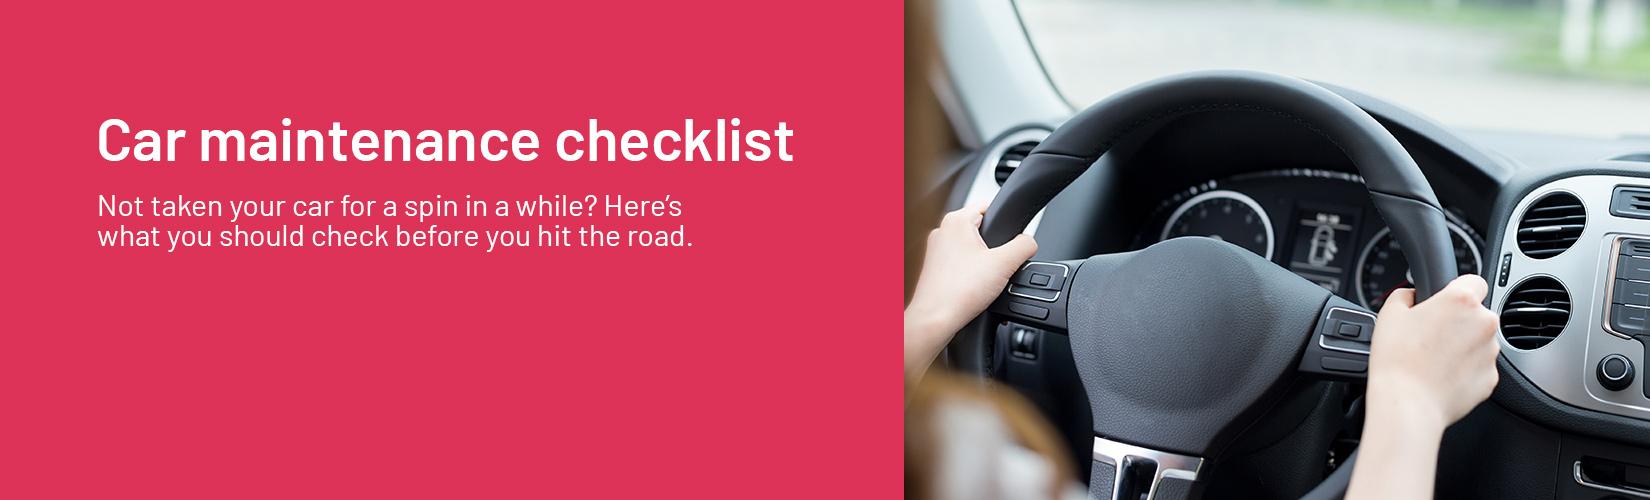 Car maintenance checklist. Not taken your car for a spin in a while? Here’s what you should check before you hit the road.